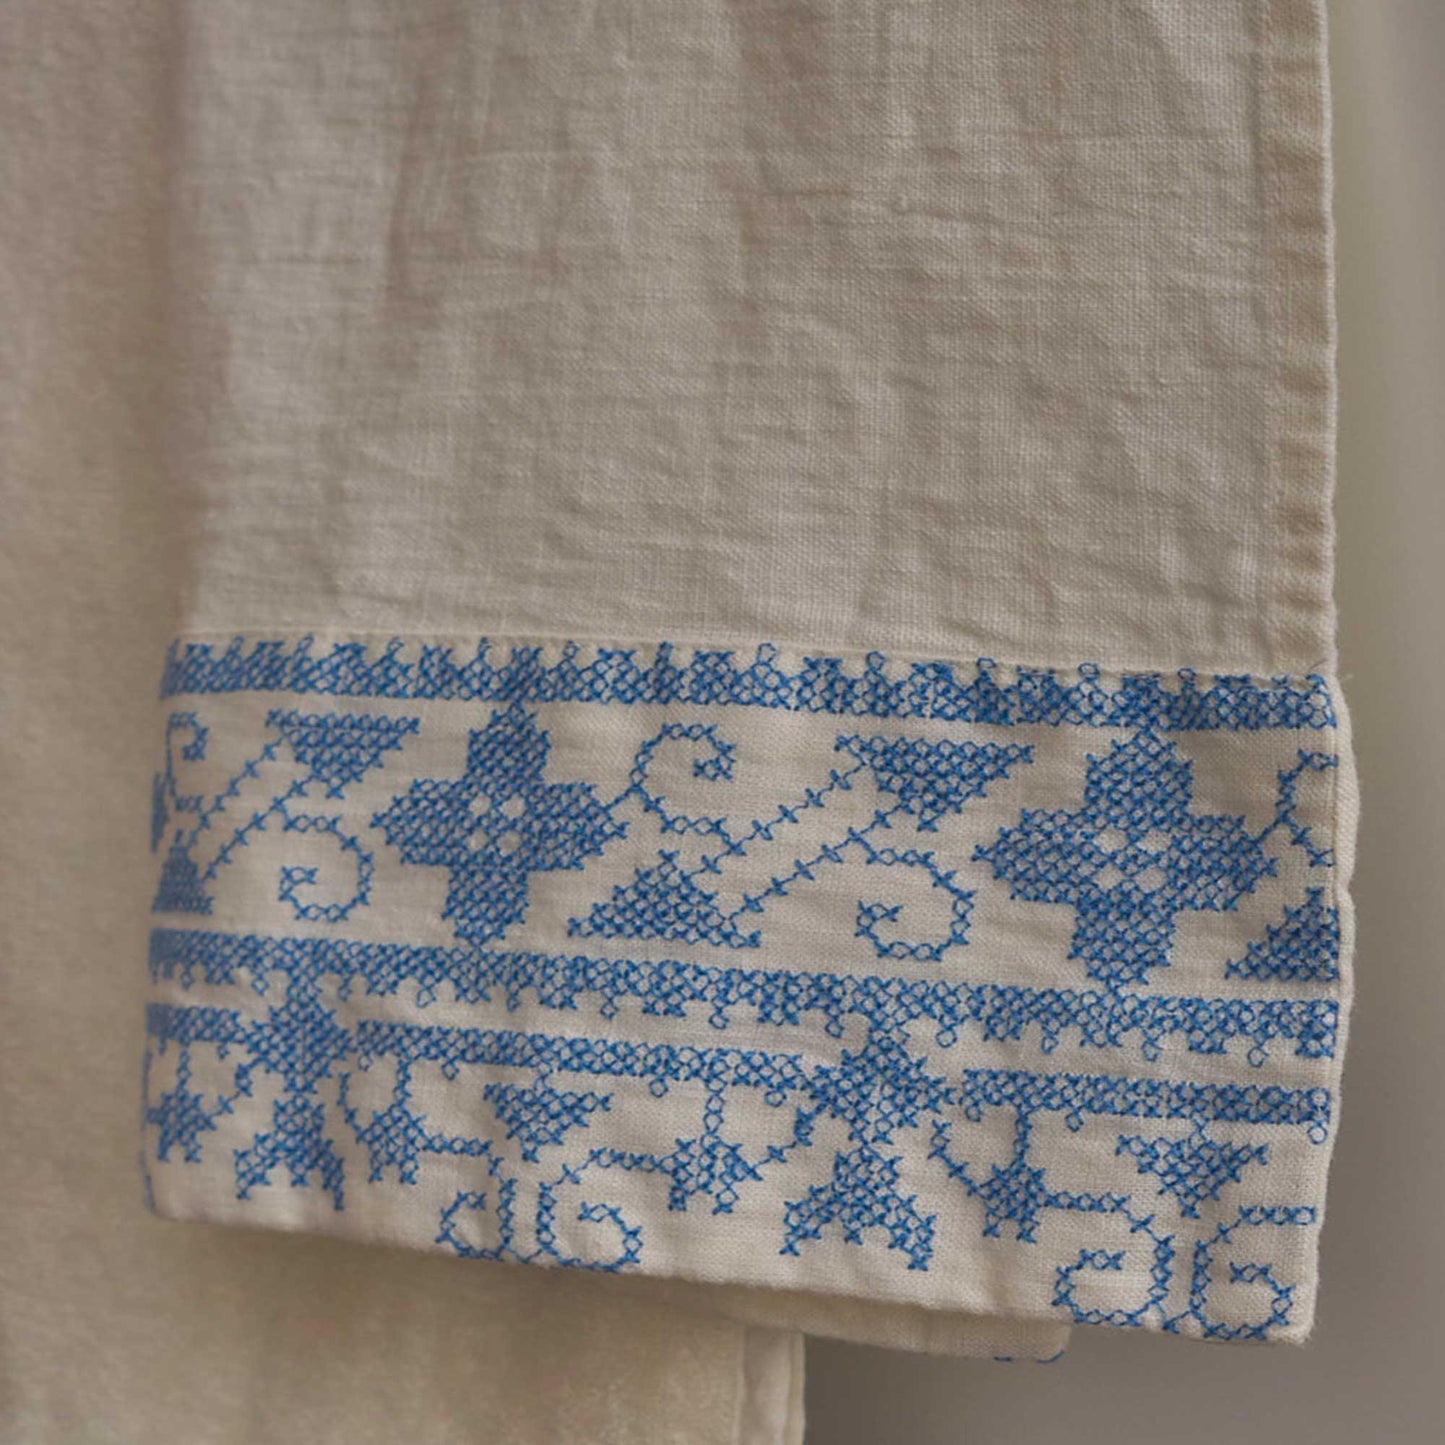 Tablecloth with cross stitch embroidery